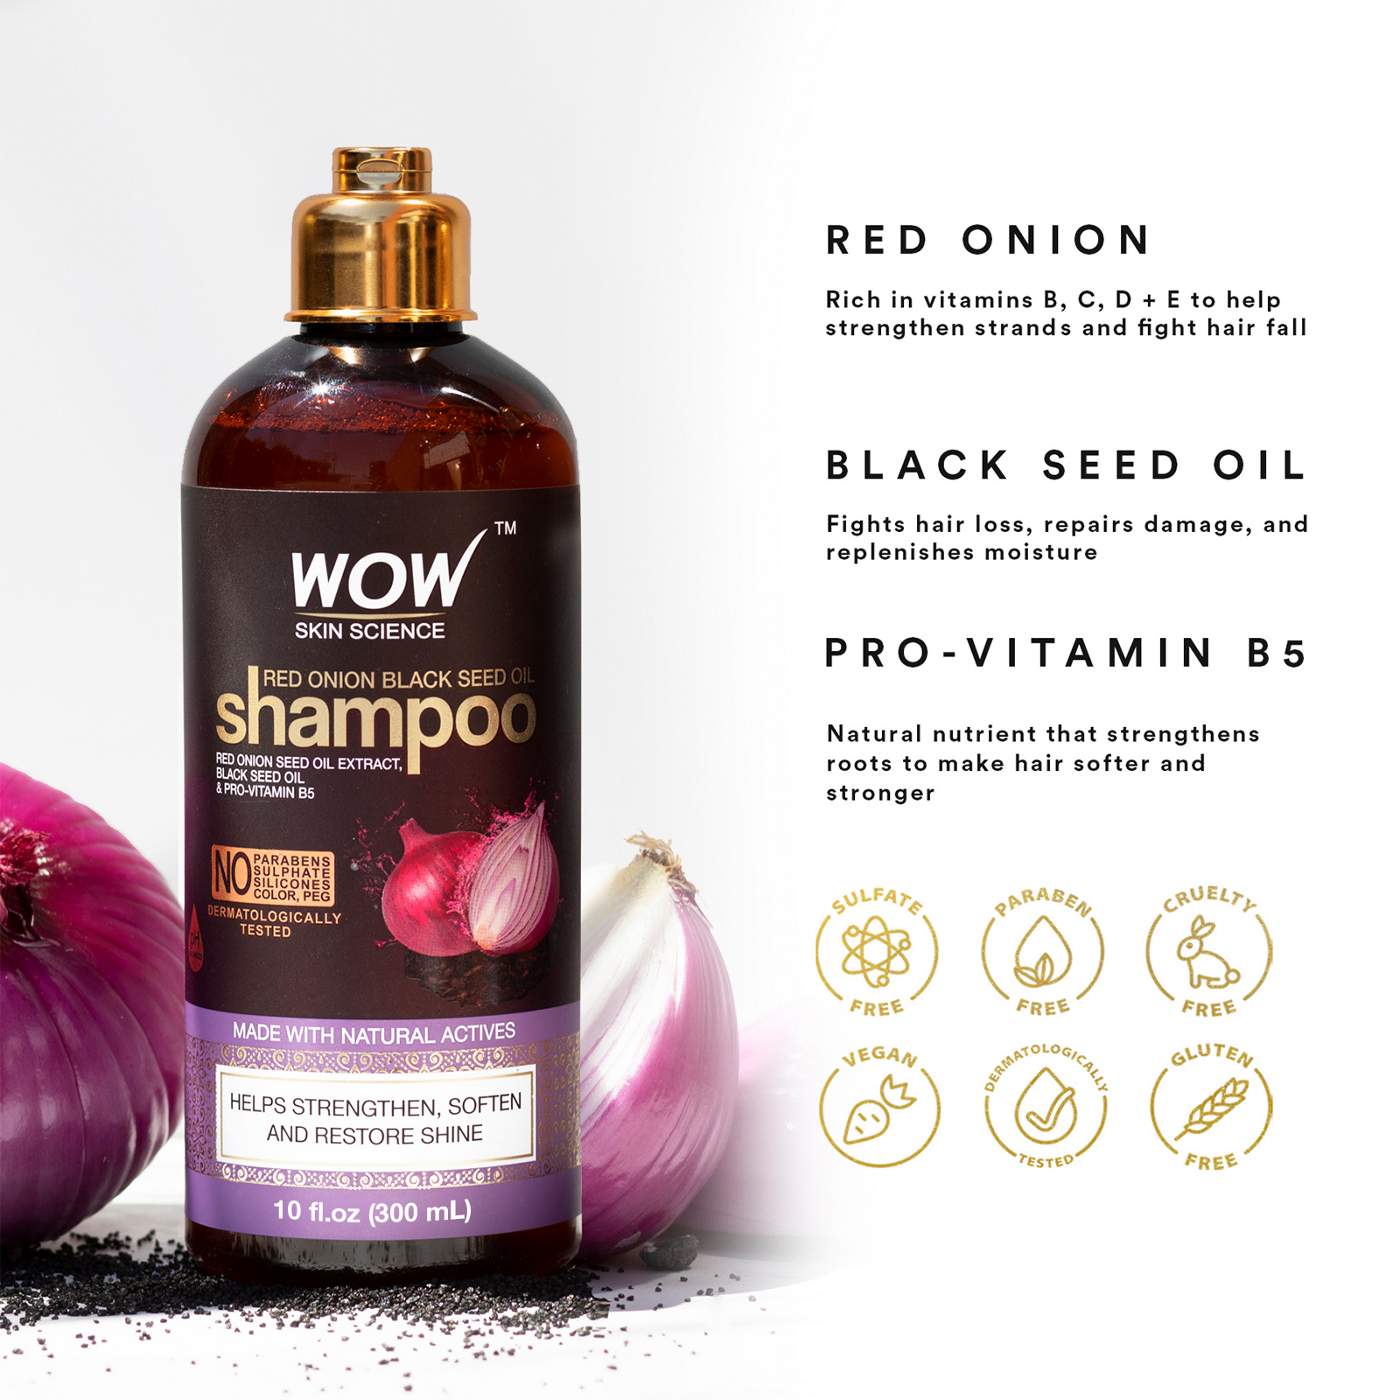 Wow Skin Science Red Onion Black Seed Oil Shampoo; image 2 of 3